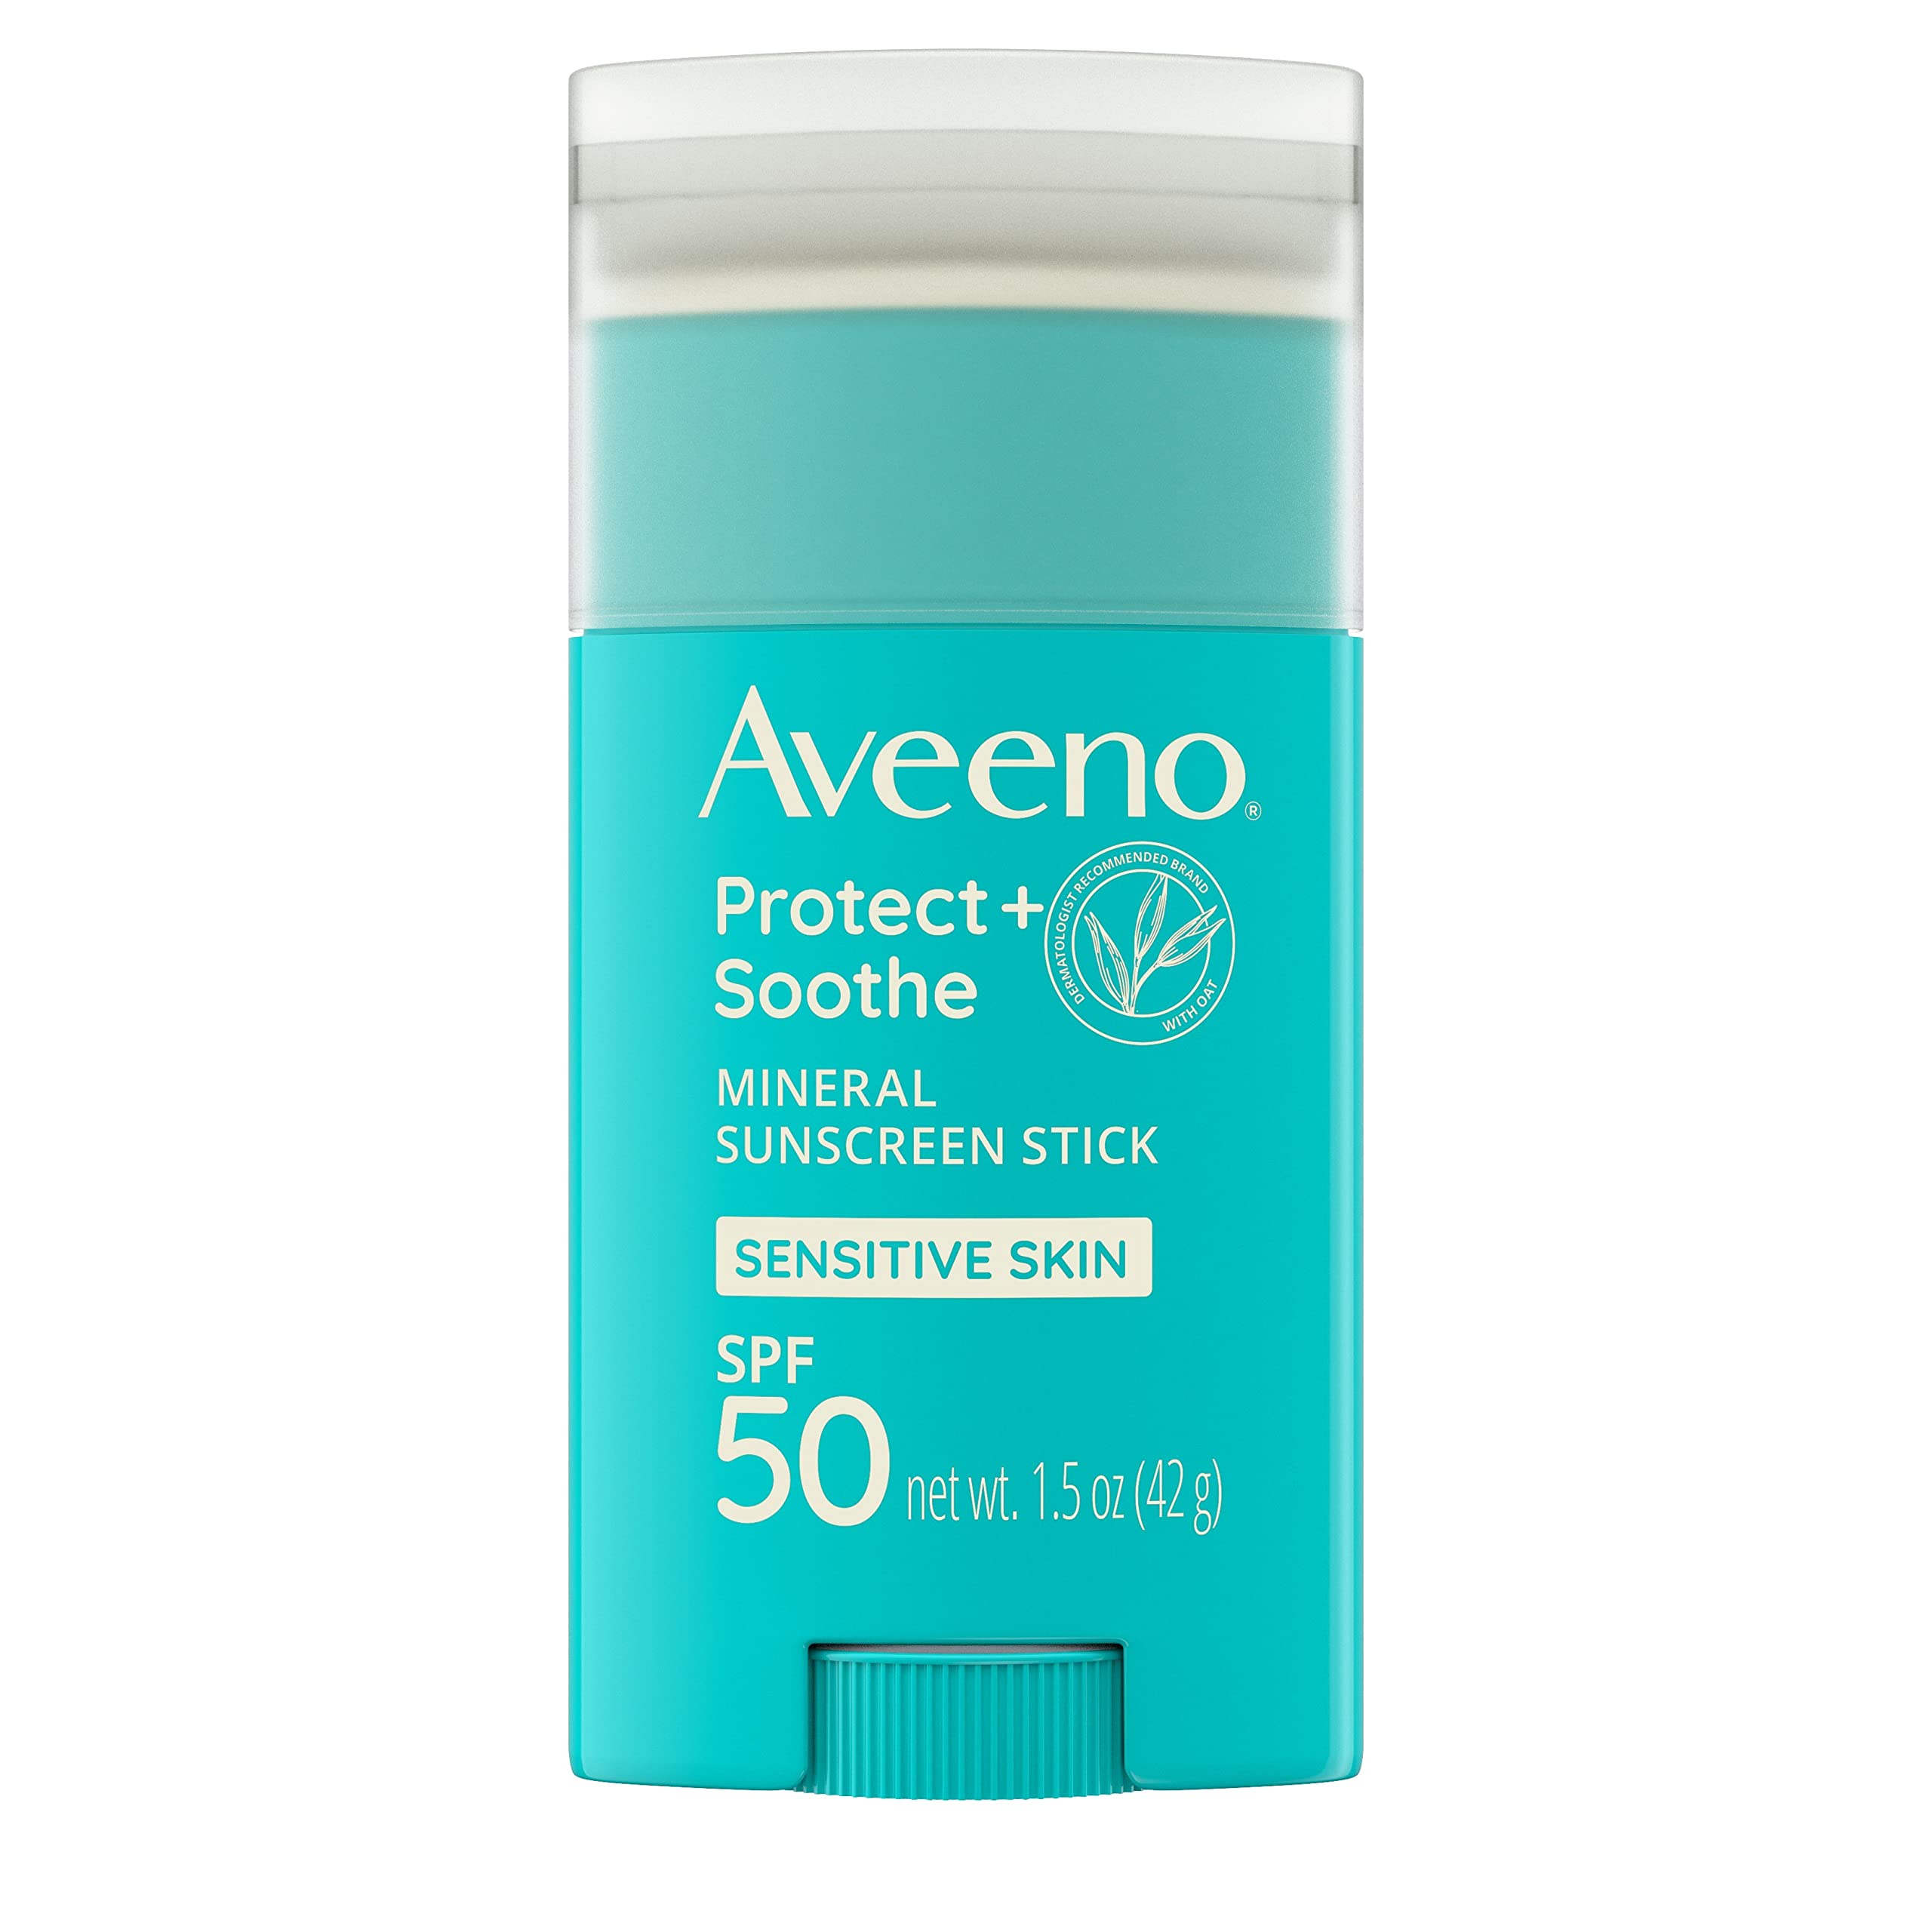 Aveeno Protect+ Soothe Mineral Sunscreen Stick